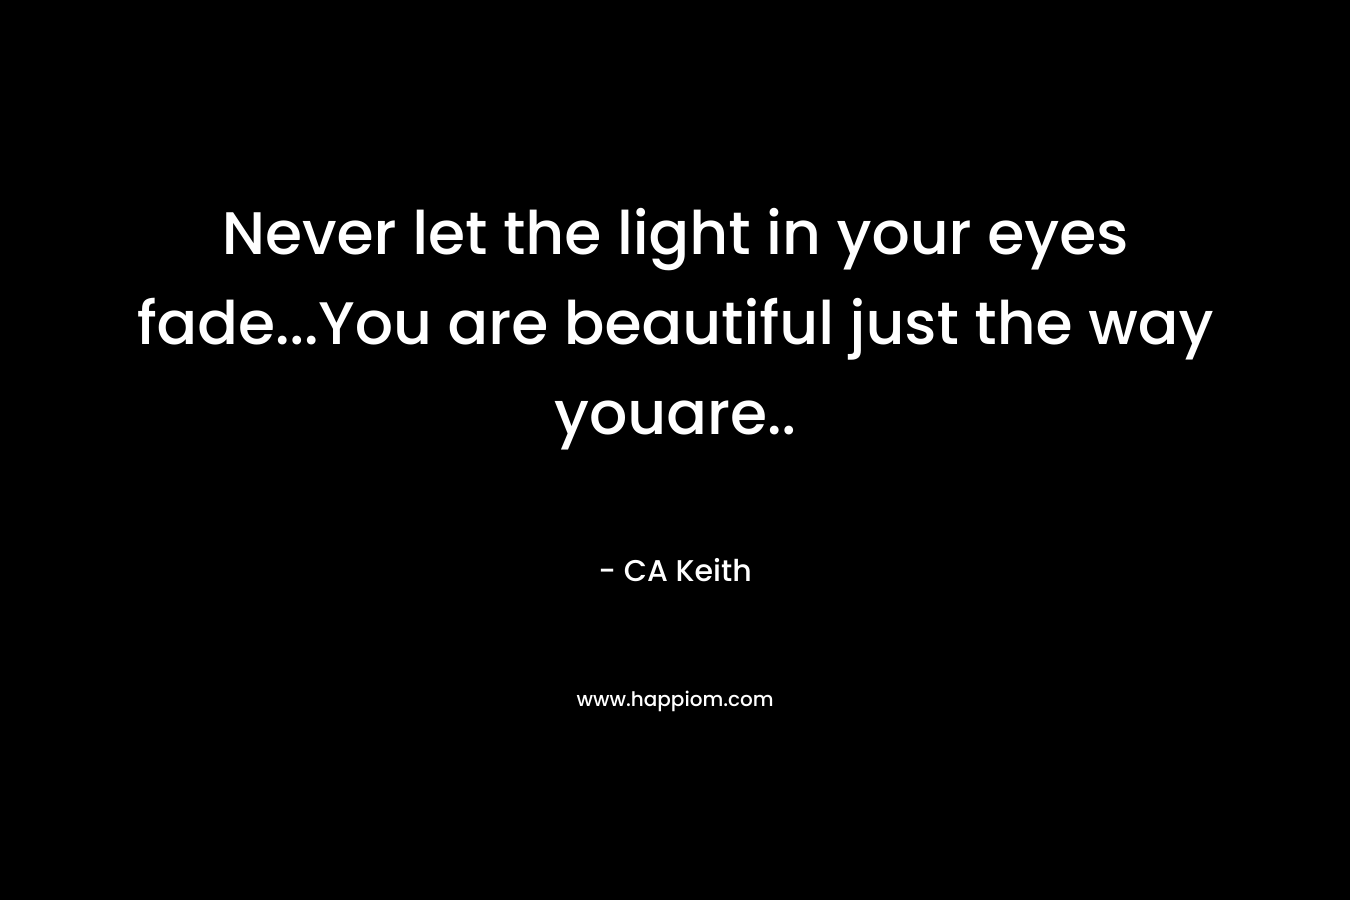 Never let the light in your eyes fade...You are beautiful just the way youare..